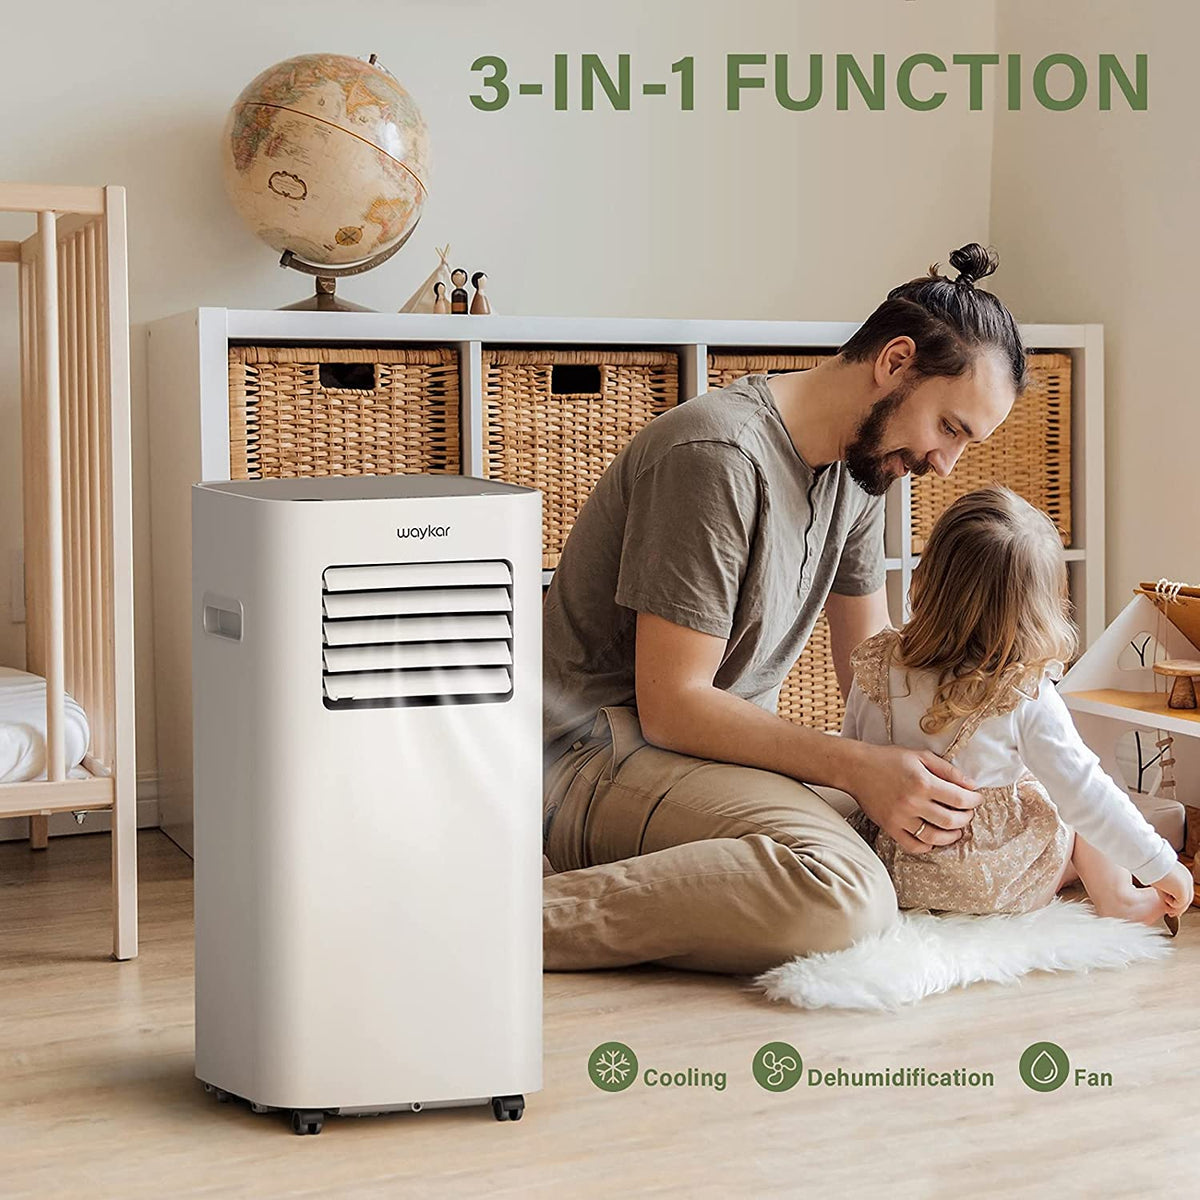 3 in 1 Portable Air Conditioner 10,000 BTU with Dehumidifier and Fan Mode for Rooms up to 300 Sq.Ft for Home,Kitchen,RV,Bedroom